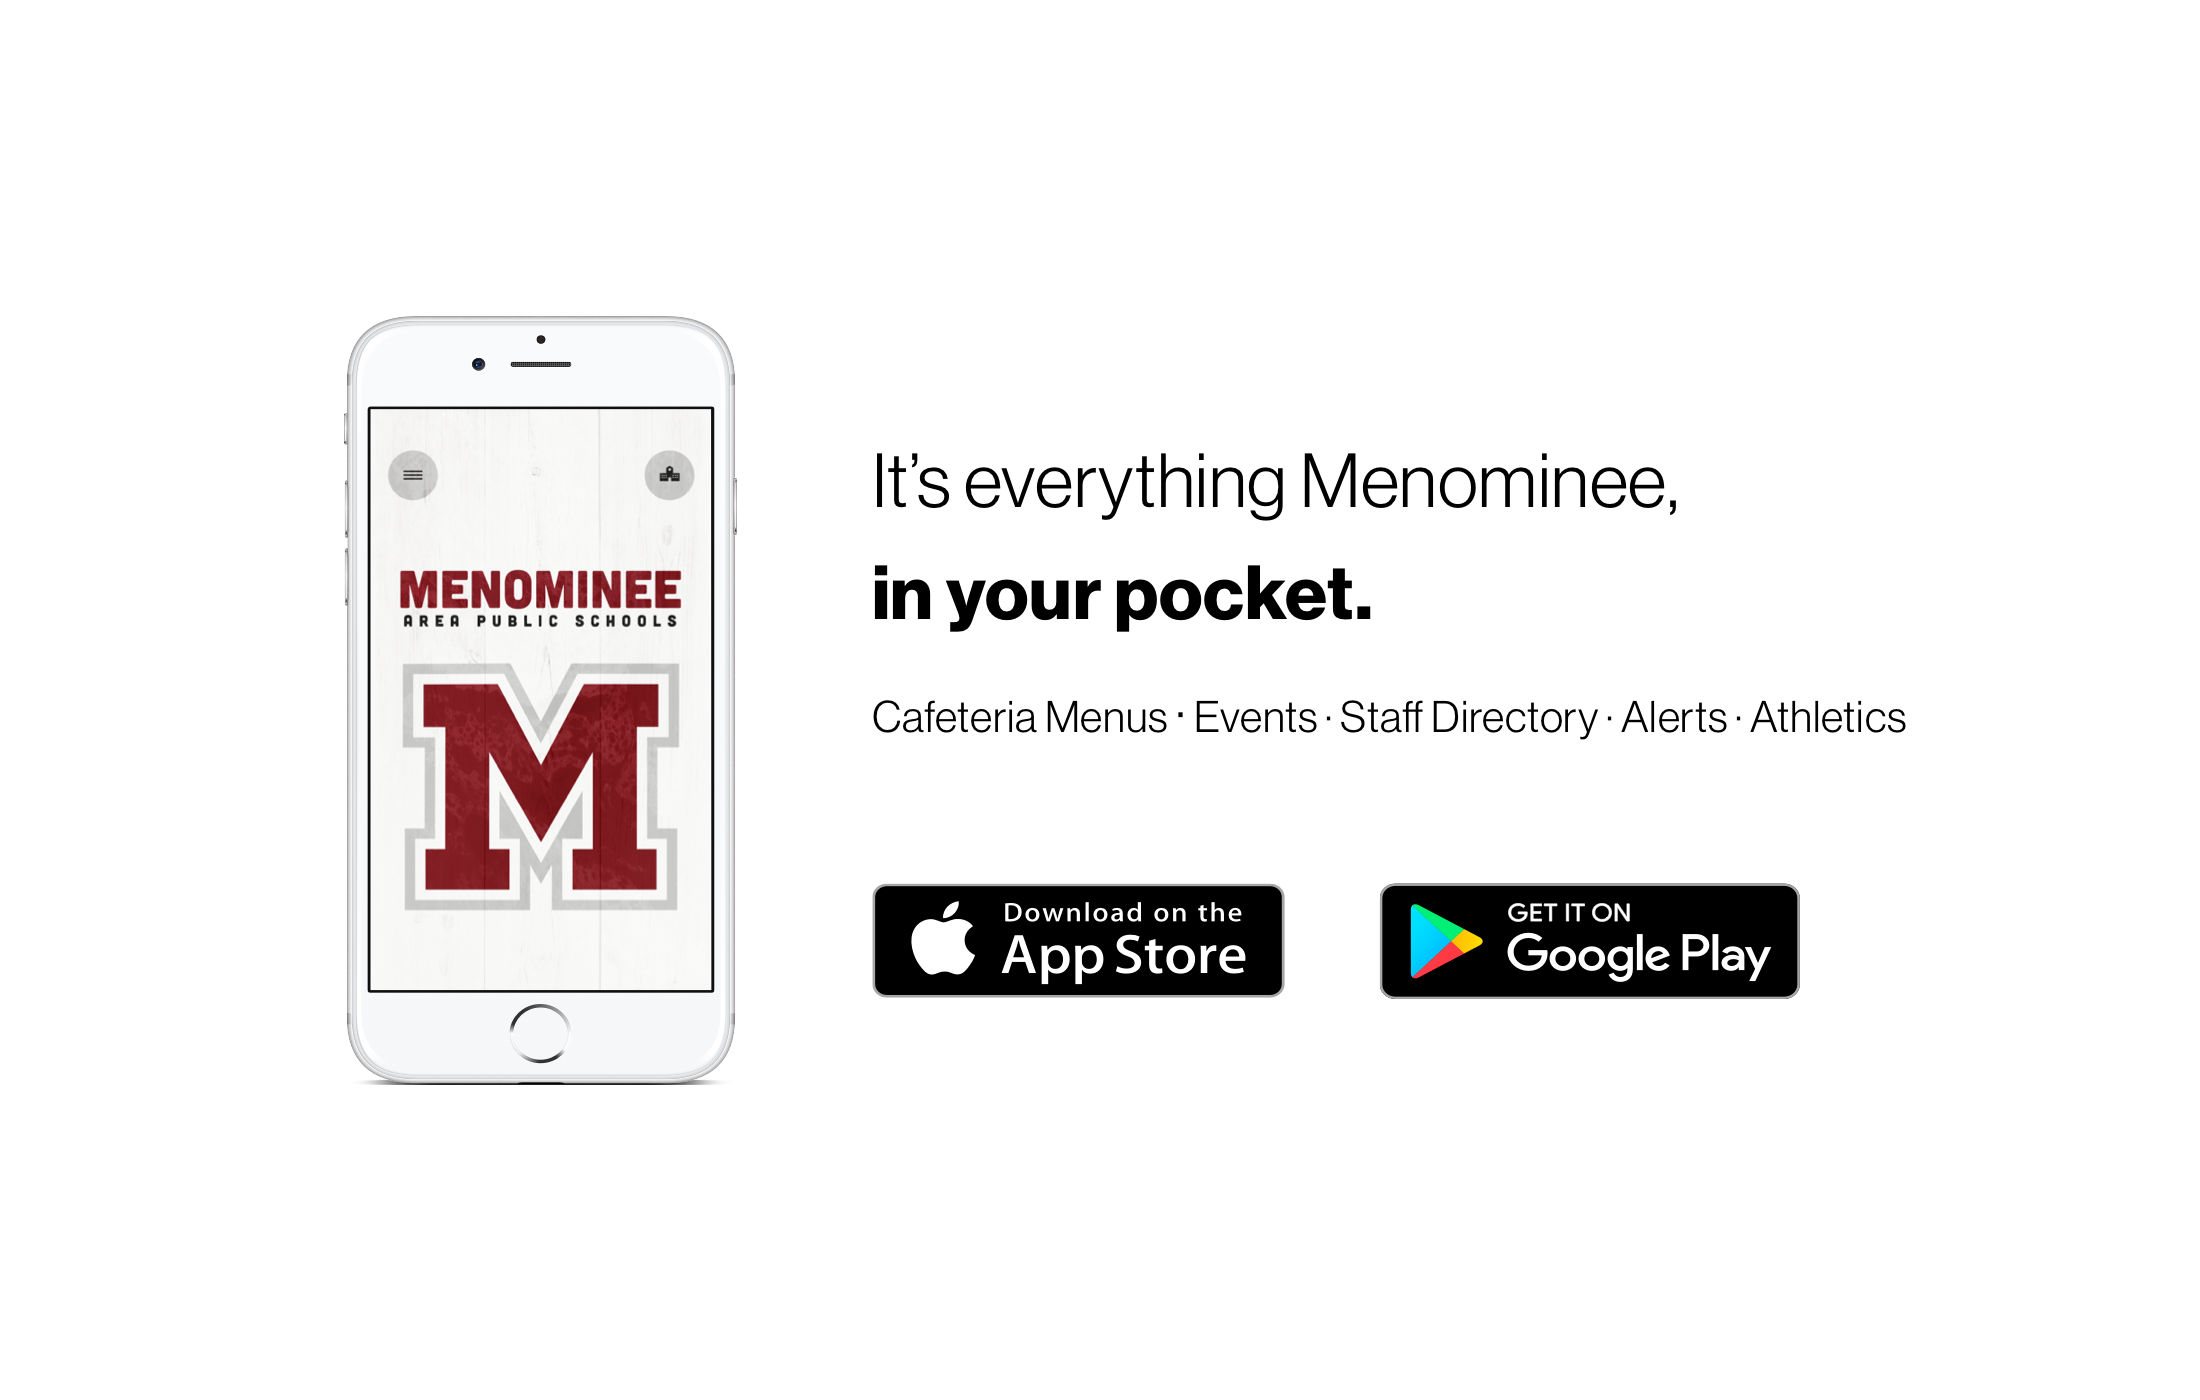 It's everything Menominee, in your pocket.